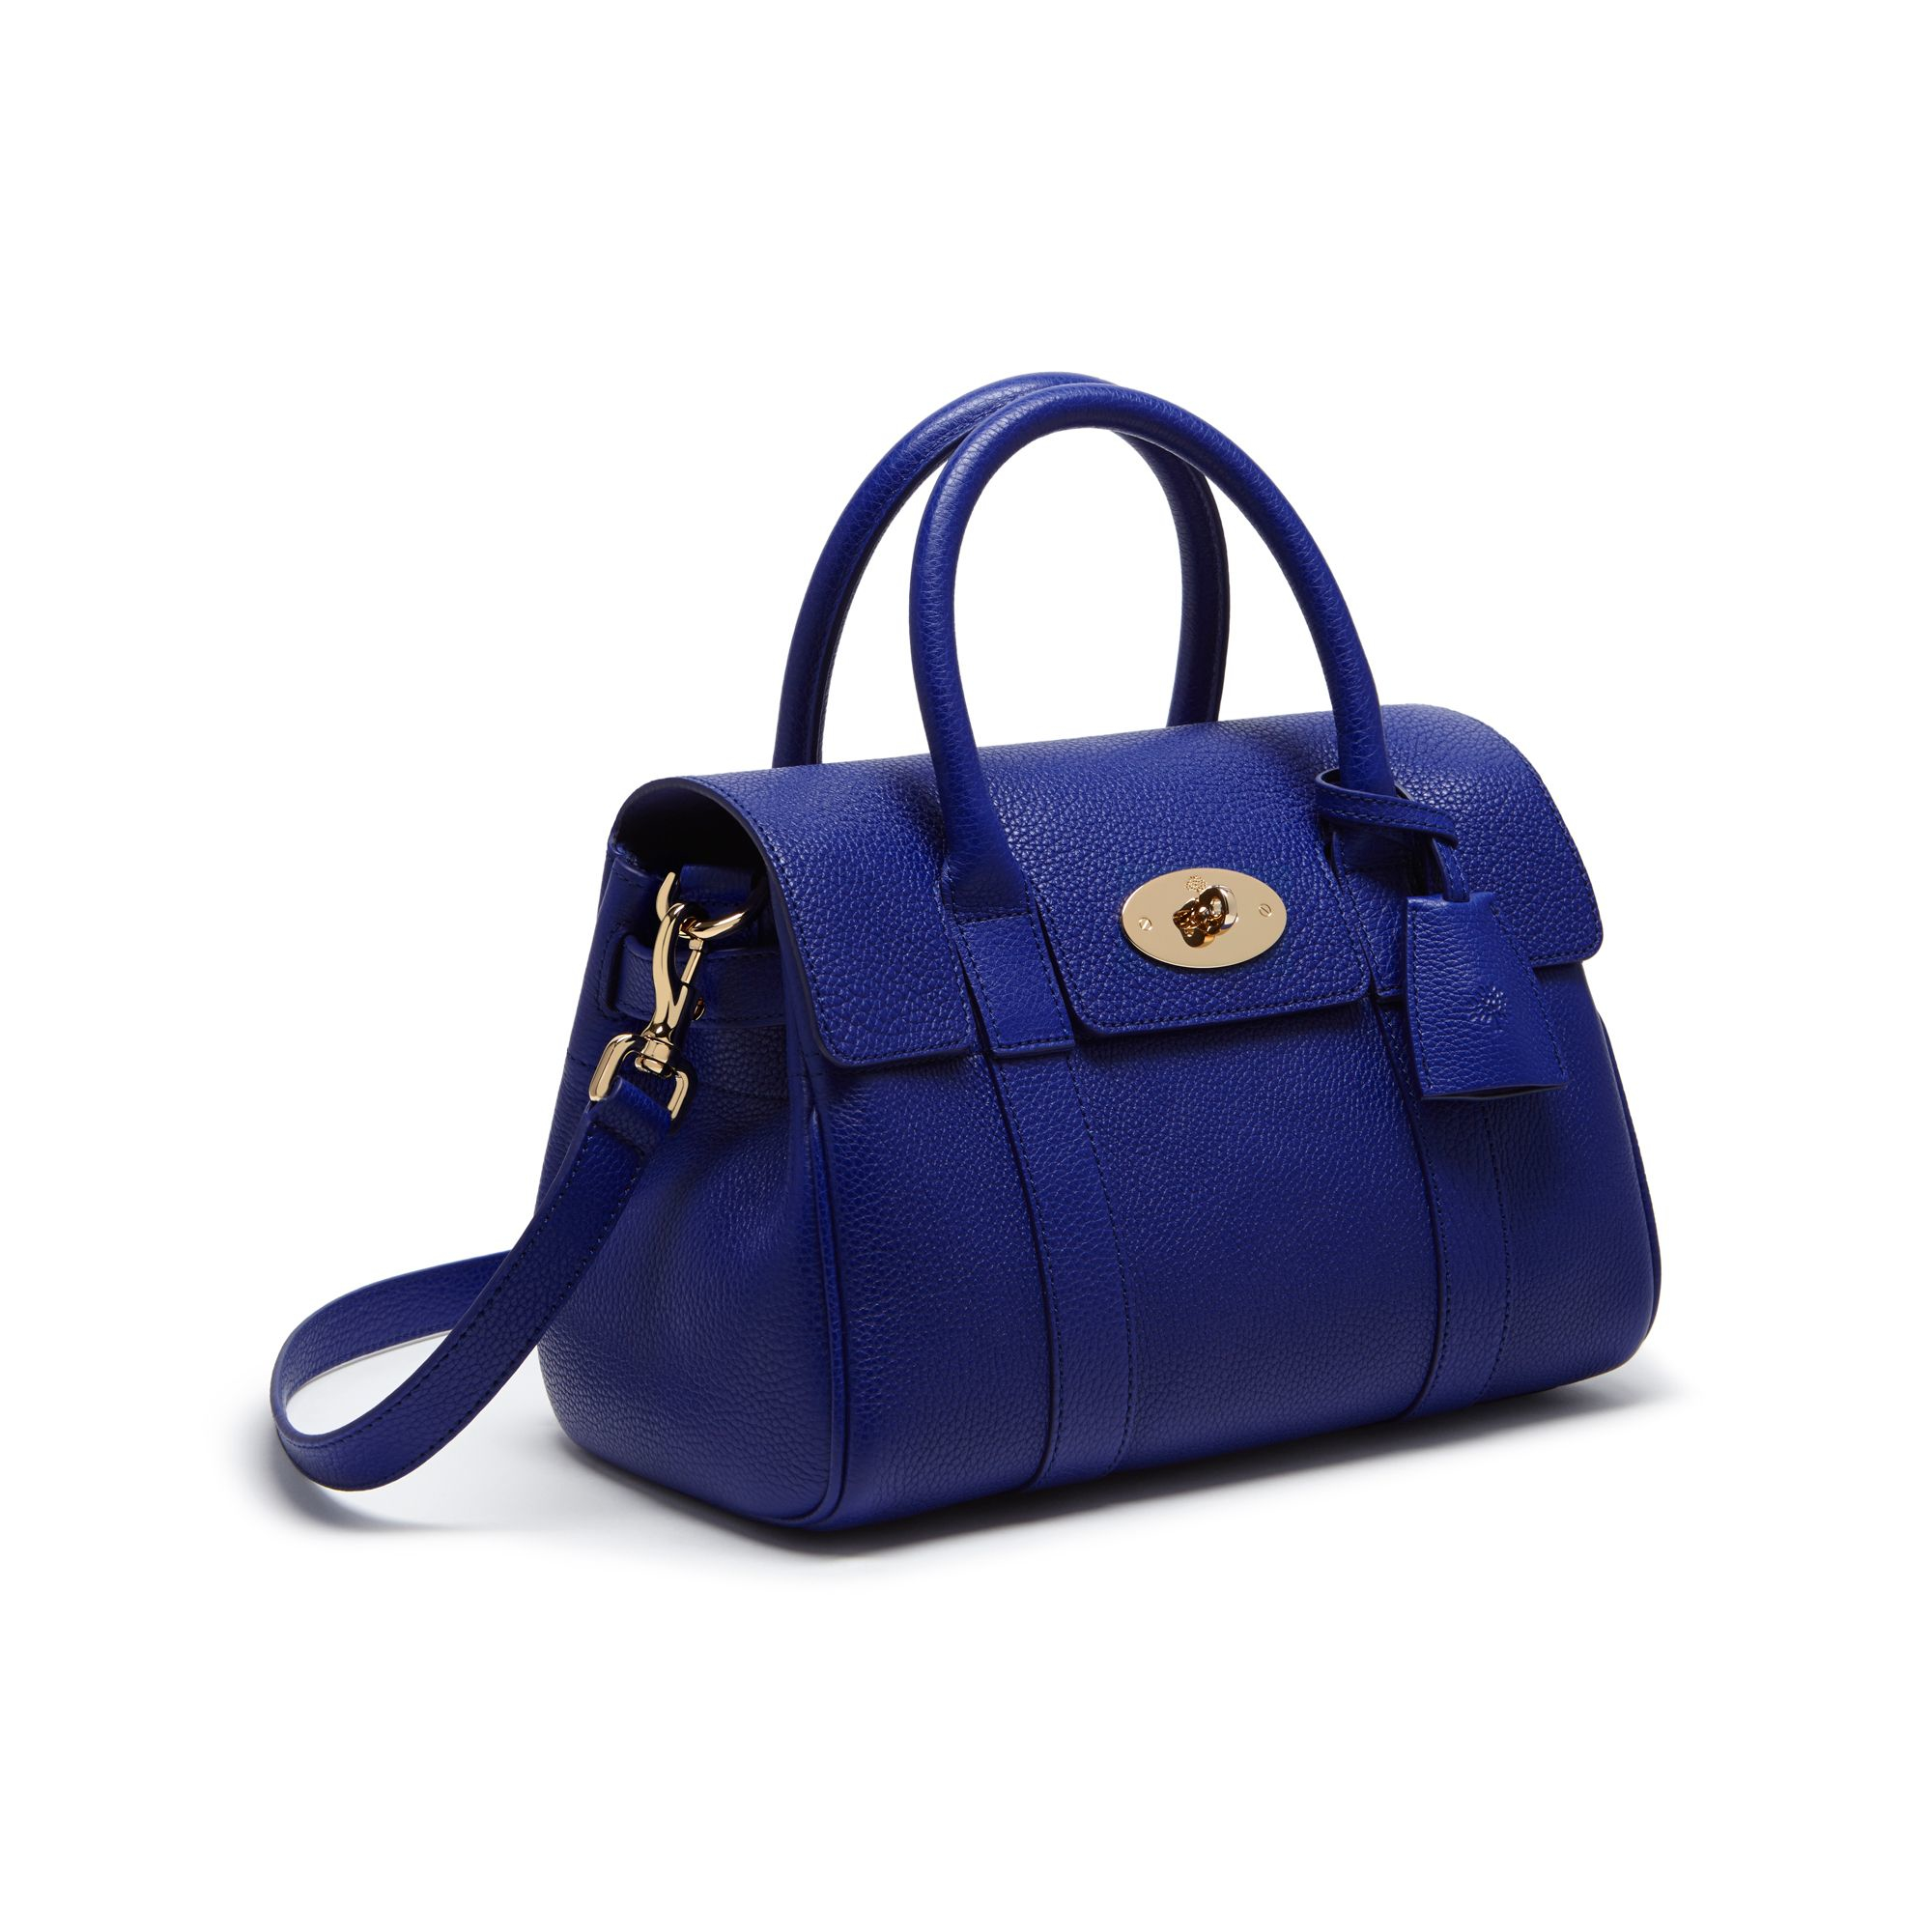 Totes bags Mulberry - Bayswater midnight blue leather tote - HH4229205U135